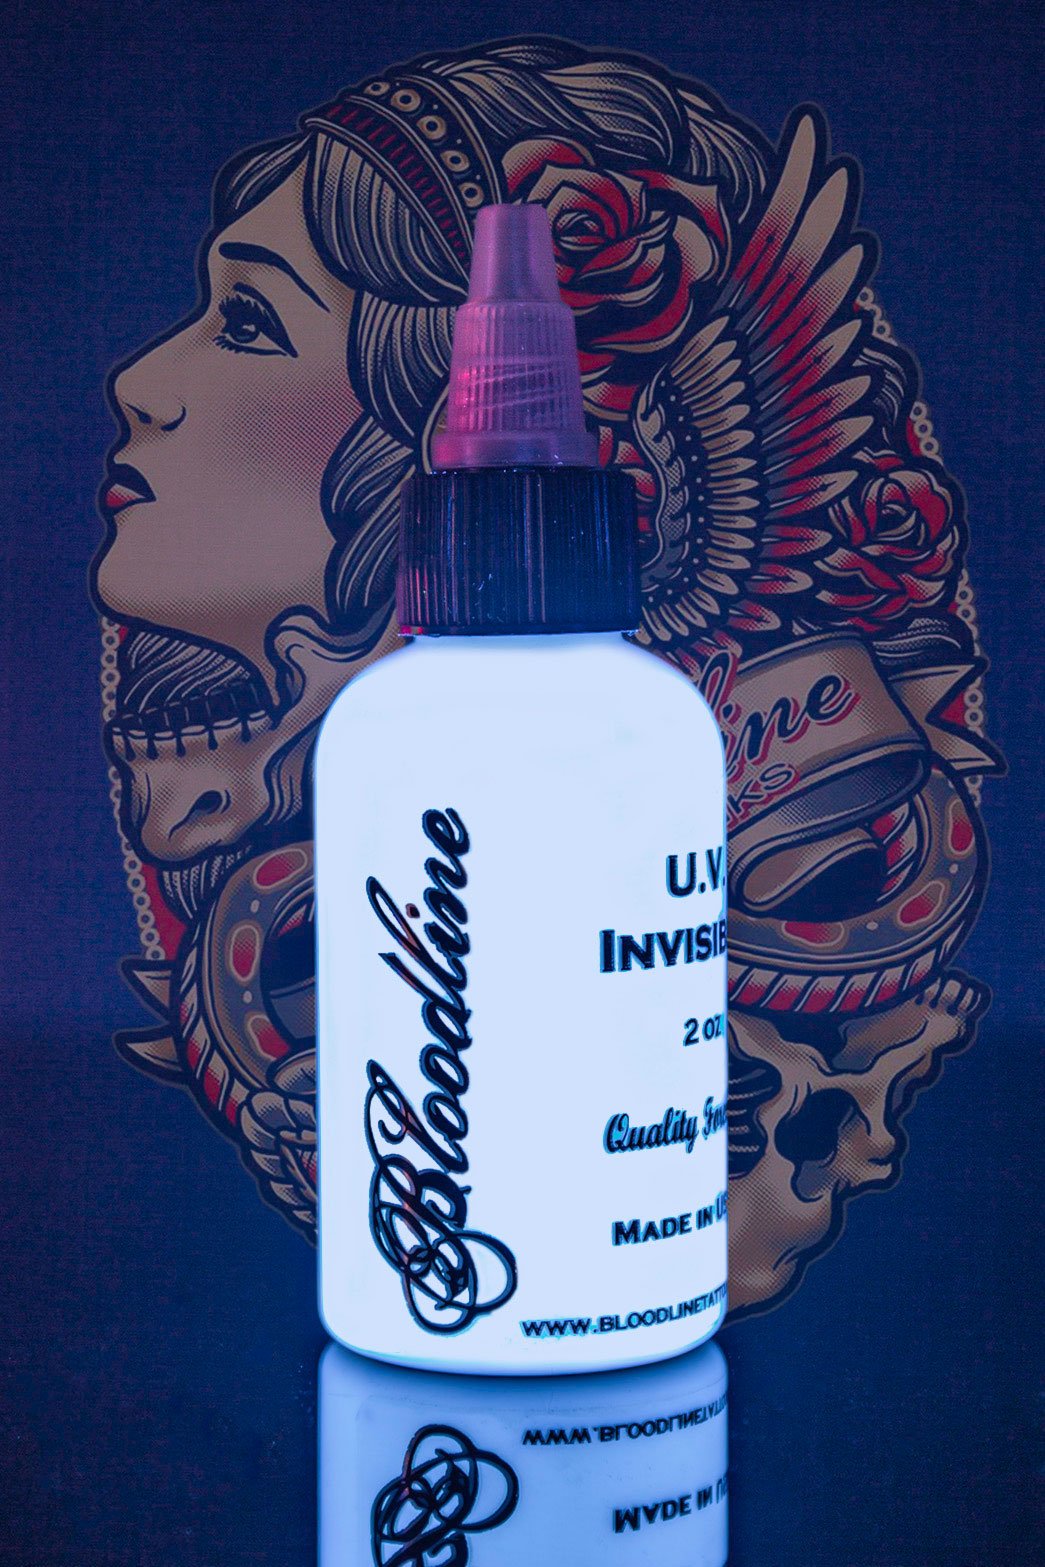 bloodline-professional-american-made-tattoo-inks-glow-in-the-dark-inks